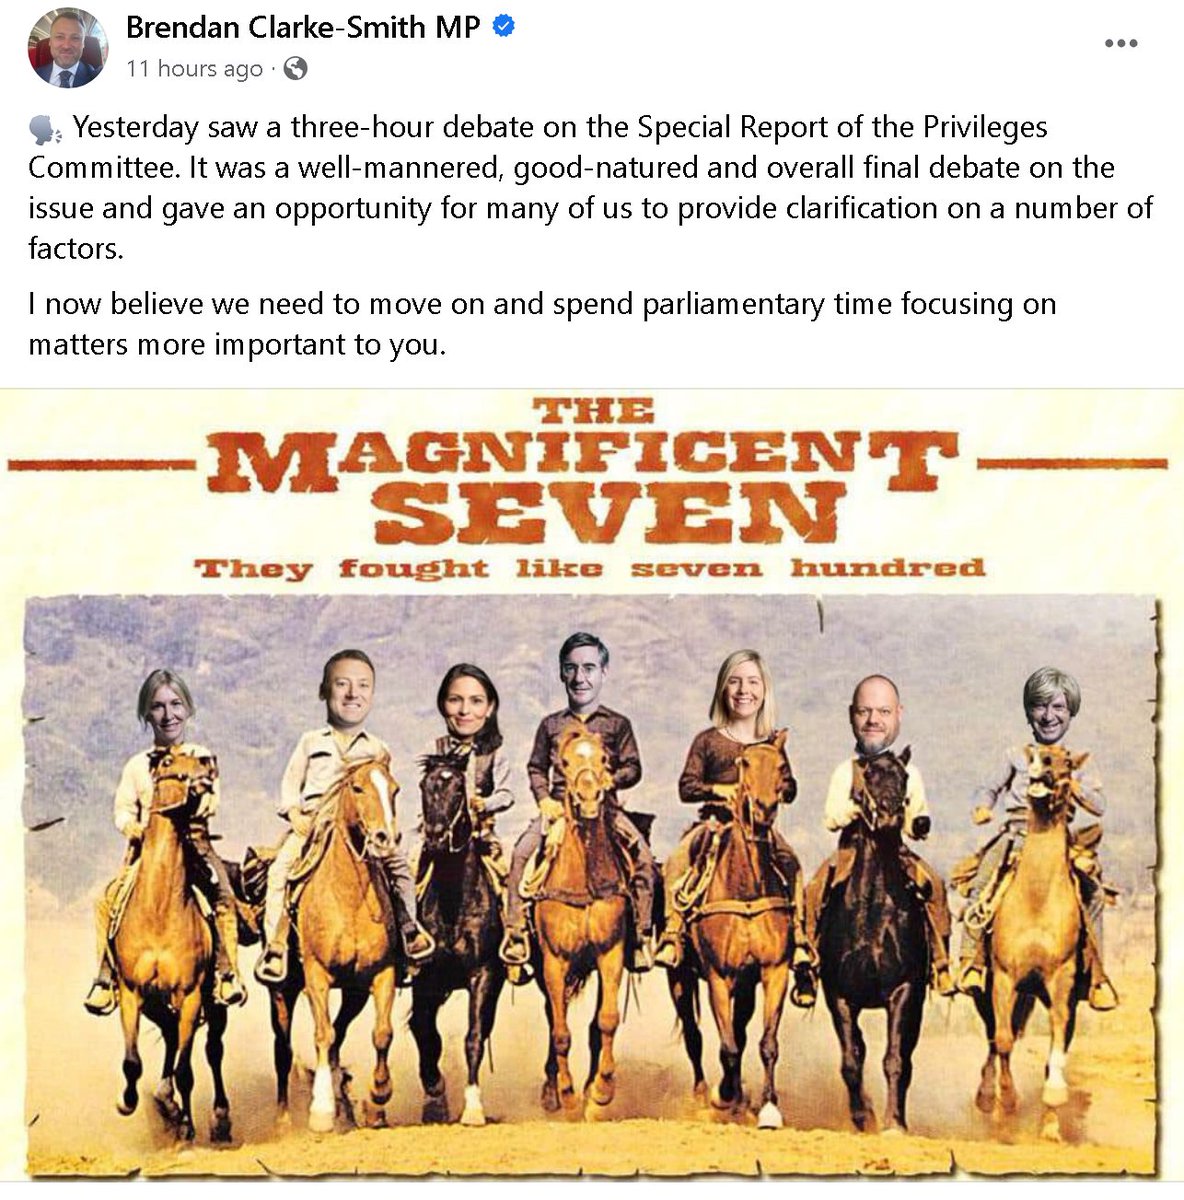 A stunningly tone-deaf post by Brenda on Facebook, suggests bullies that had brought the House into disrepute were the 'Magnificent Seven' that 'fought like seven hundred.'
What film title better describes them?
#ToriesOut369 #BrendanClarkSmith #PrivilegesCommittee